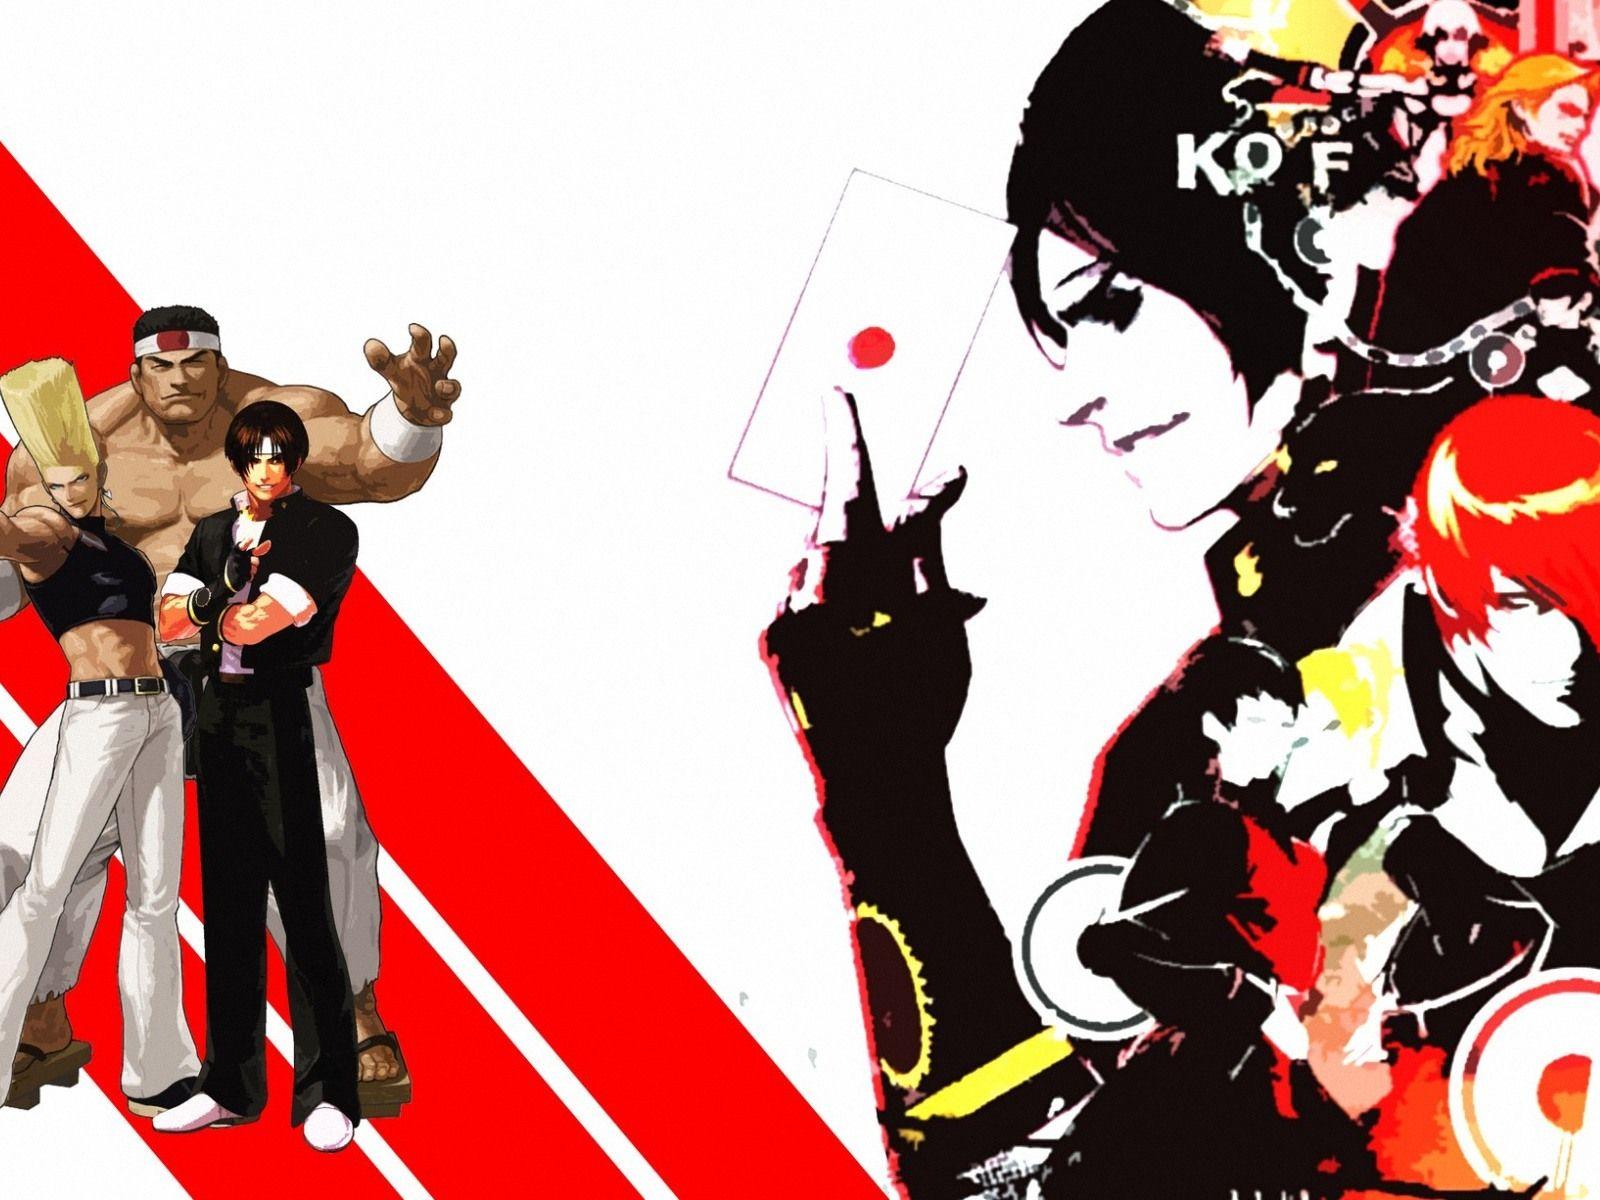 King Of Fighters Wallpaper, HD King Of Fighters Wallpaper